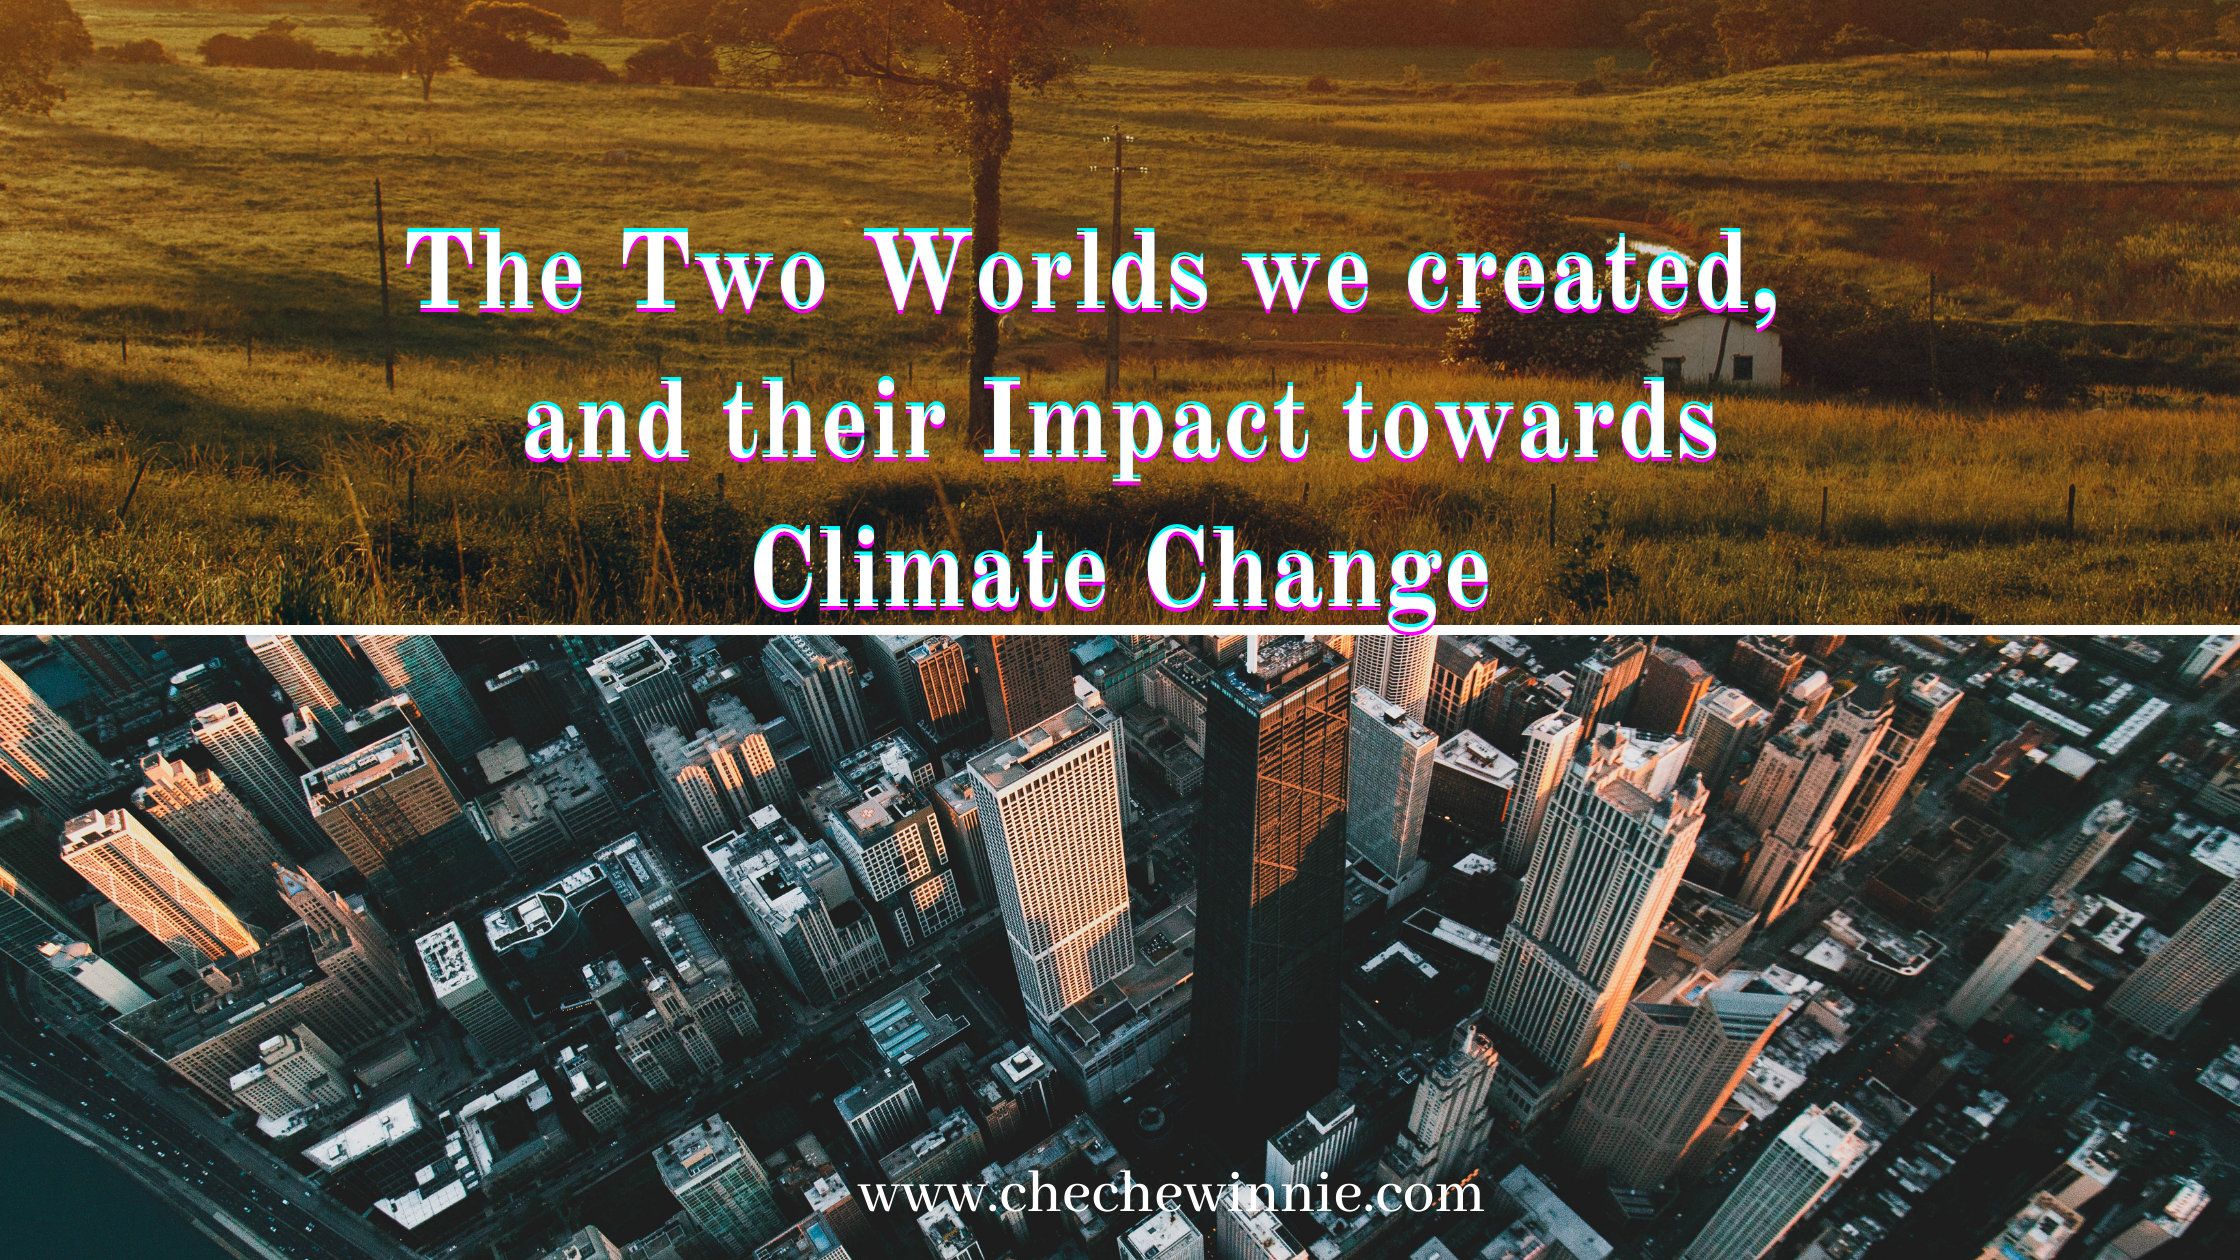 The Two Worlds we created, and their Impact towards Climate Change